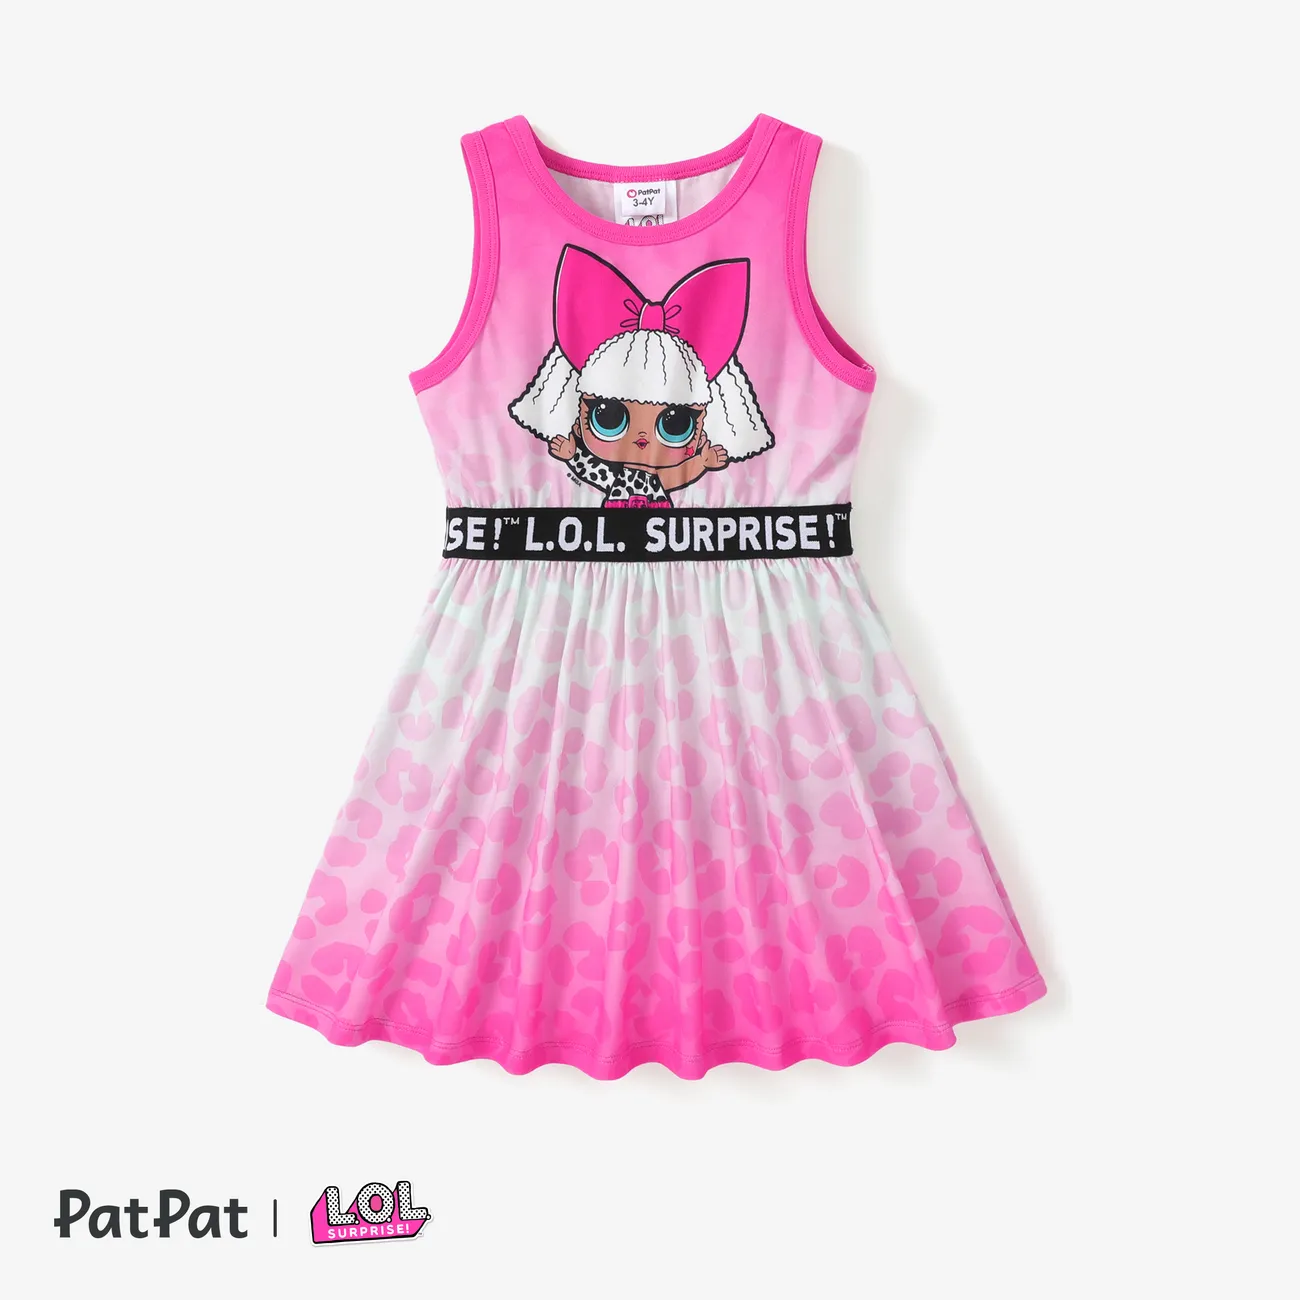 PAW Patrol Little Girl Web Gradient Pattern Sleeveless Dress or Checkerboard All-over Pattern Dress PINK-1 big image 1